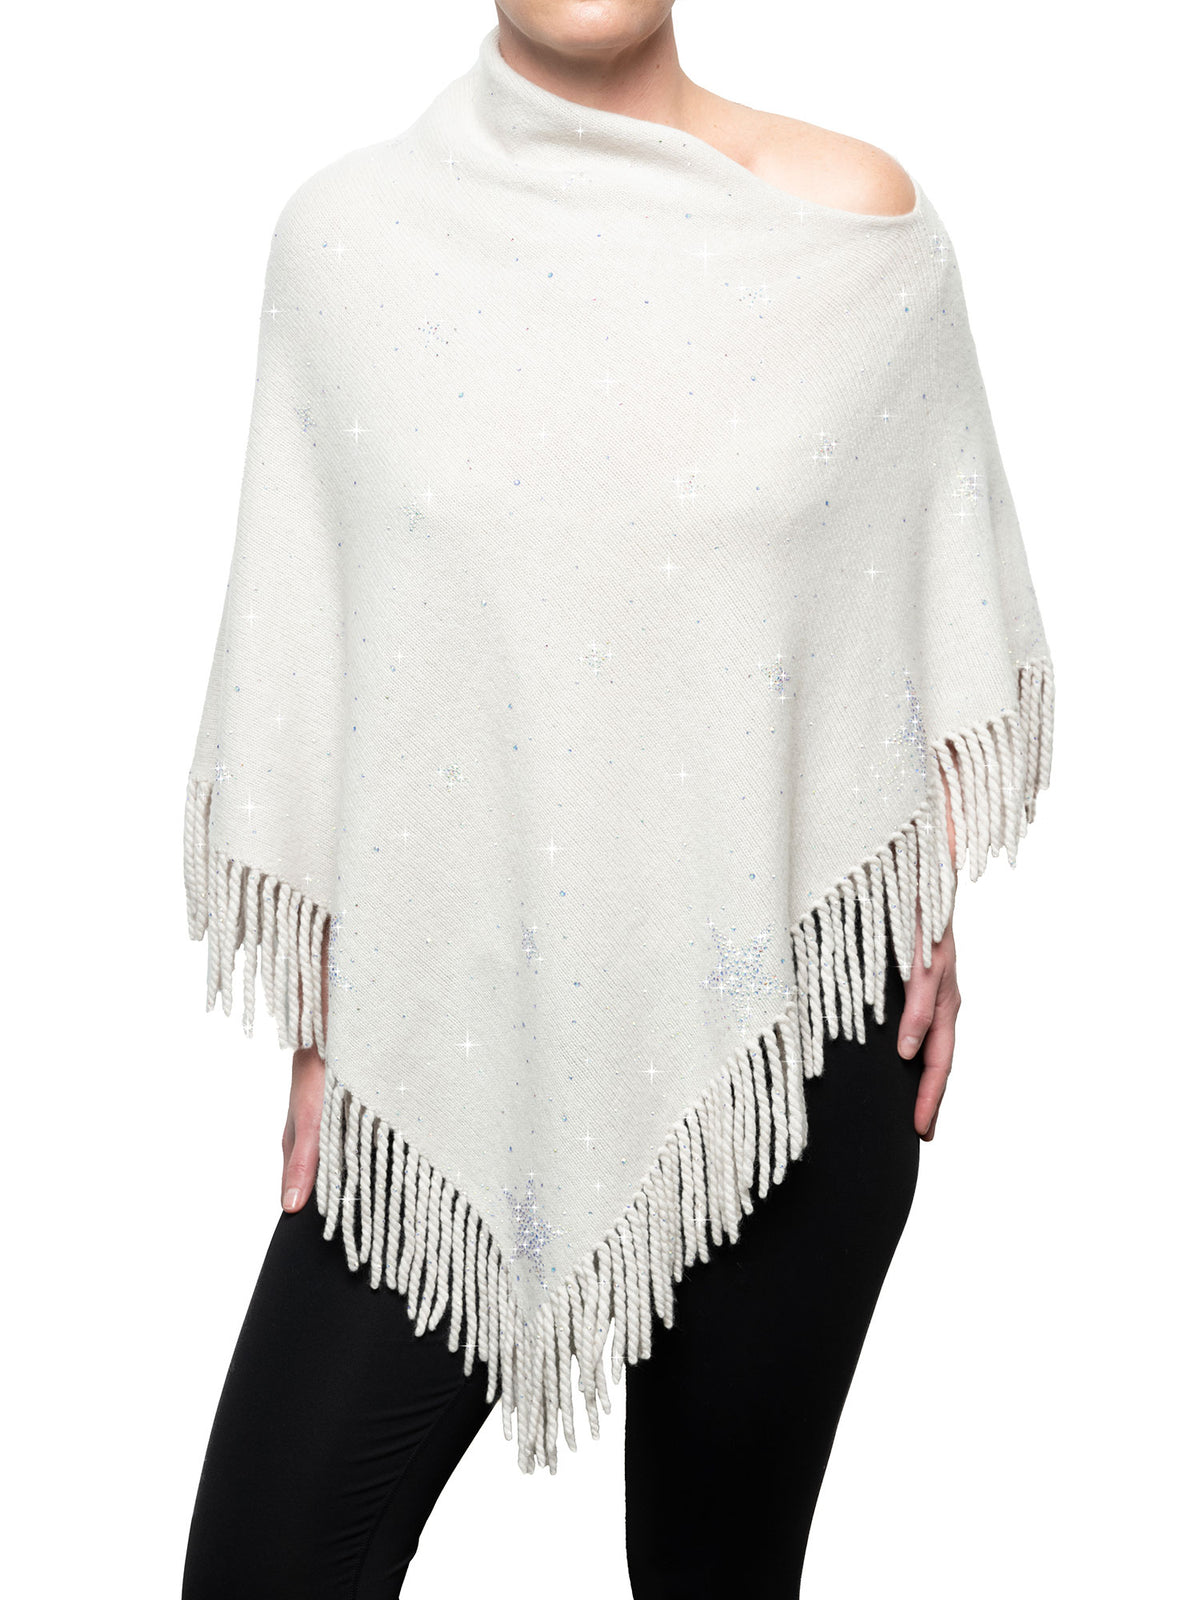 PONCHO In-store & Online // A Lonestar State favorite